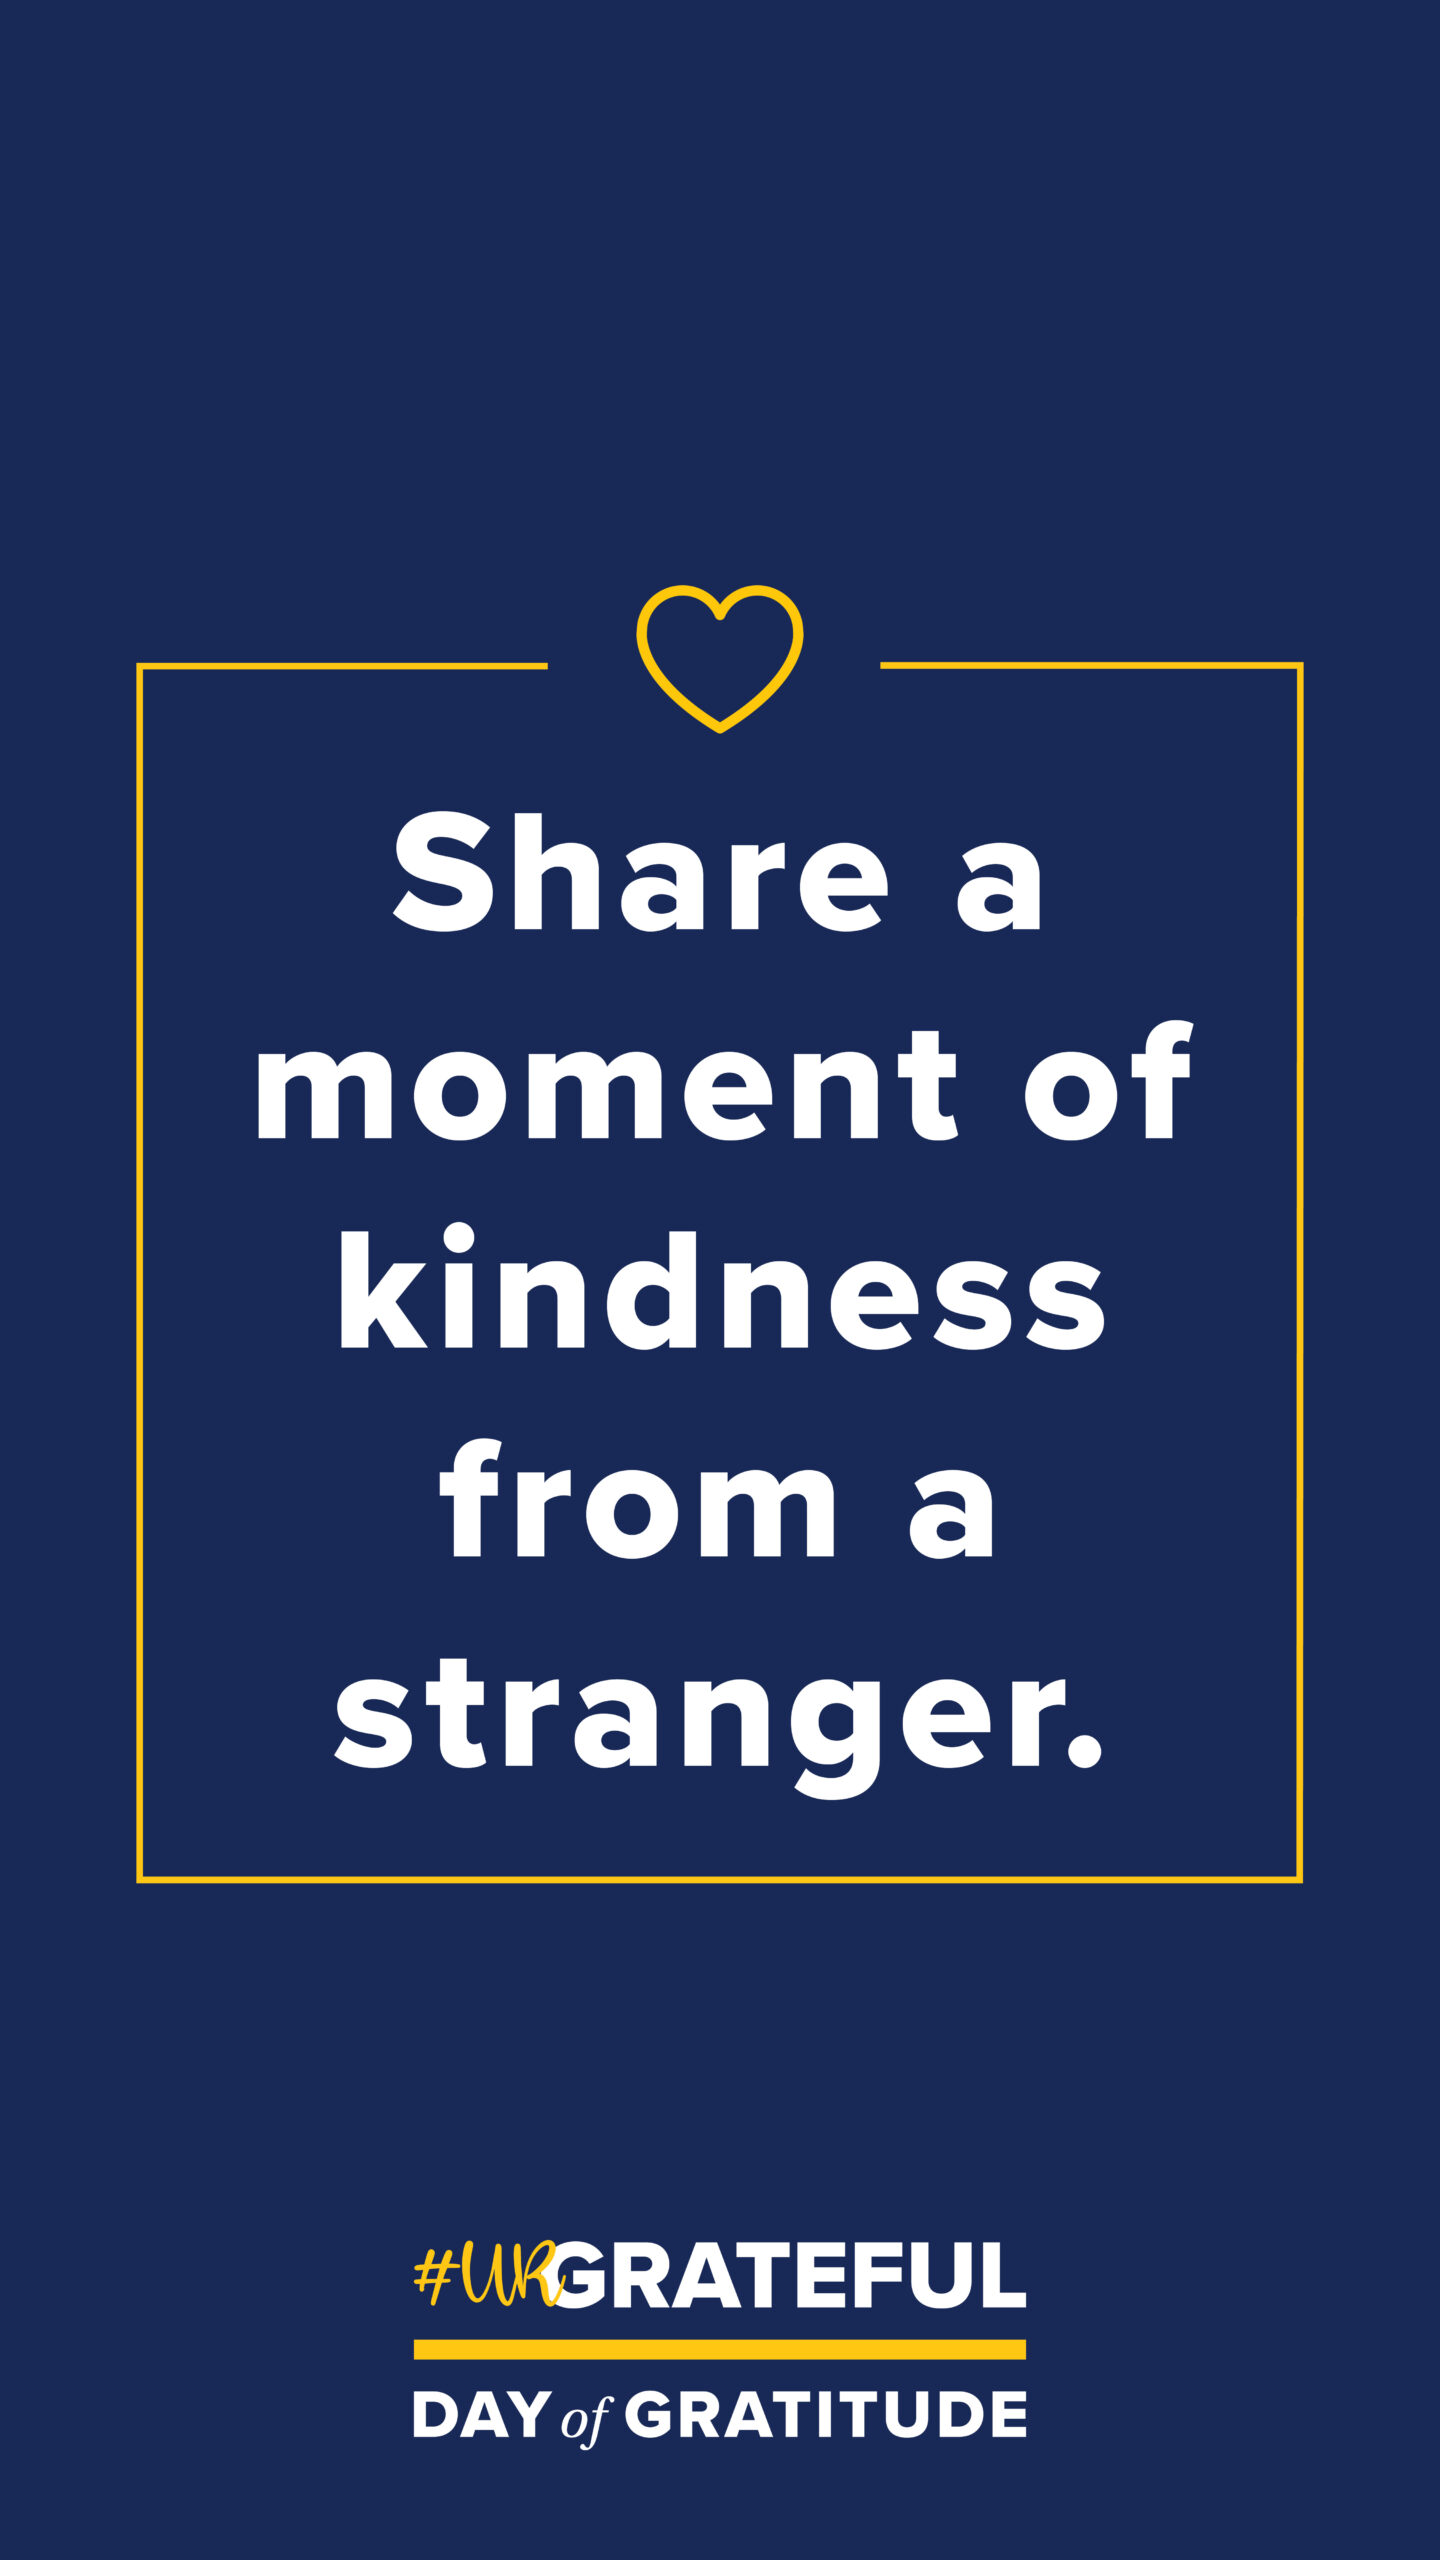 Share a moment of kindness from a stranger. white text on dark blue background